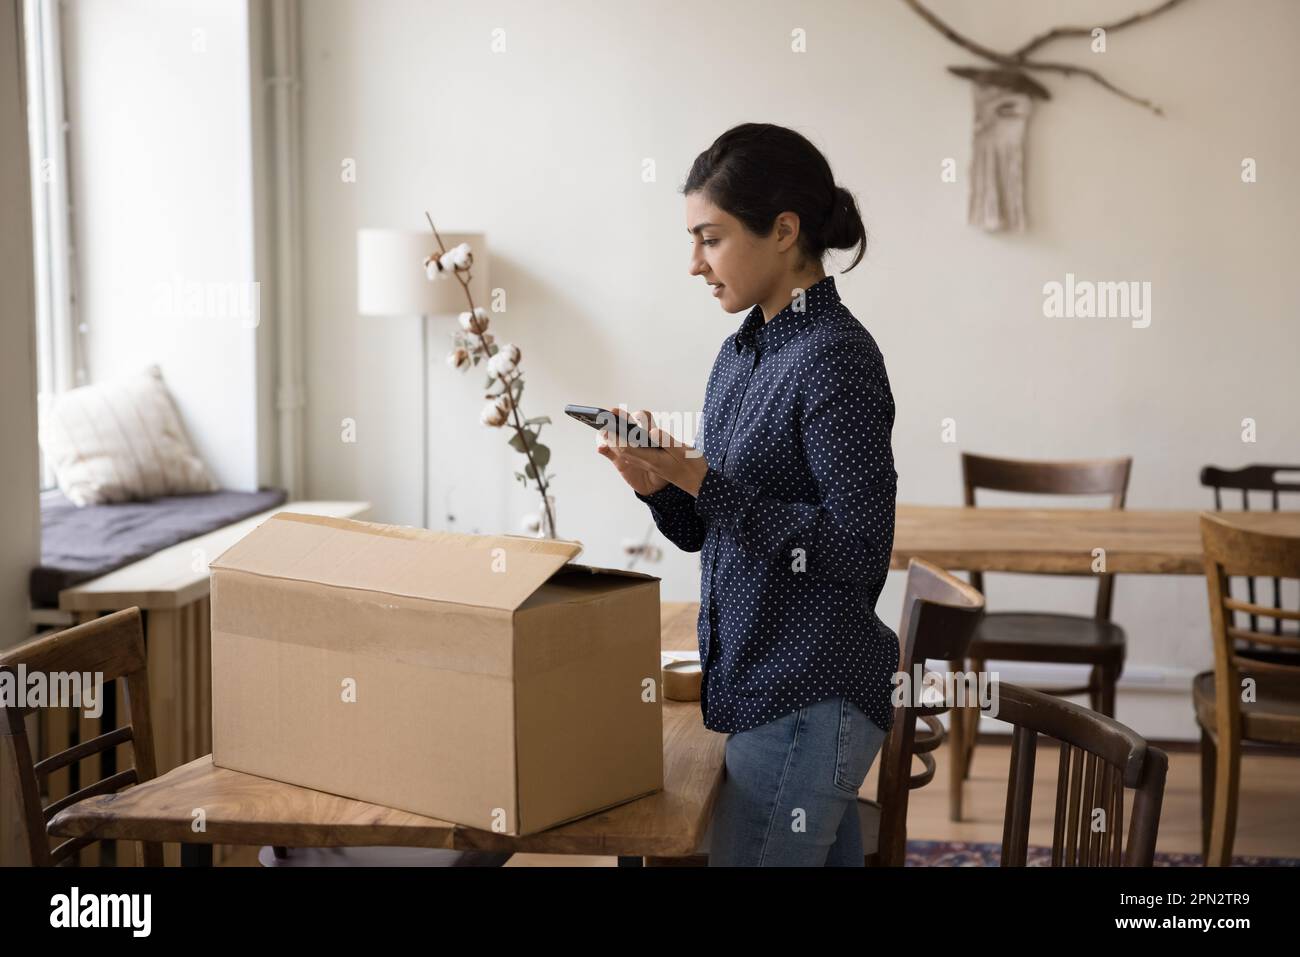 Woman prepares cardboard box for shipment using online courier services Stock Photo